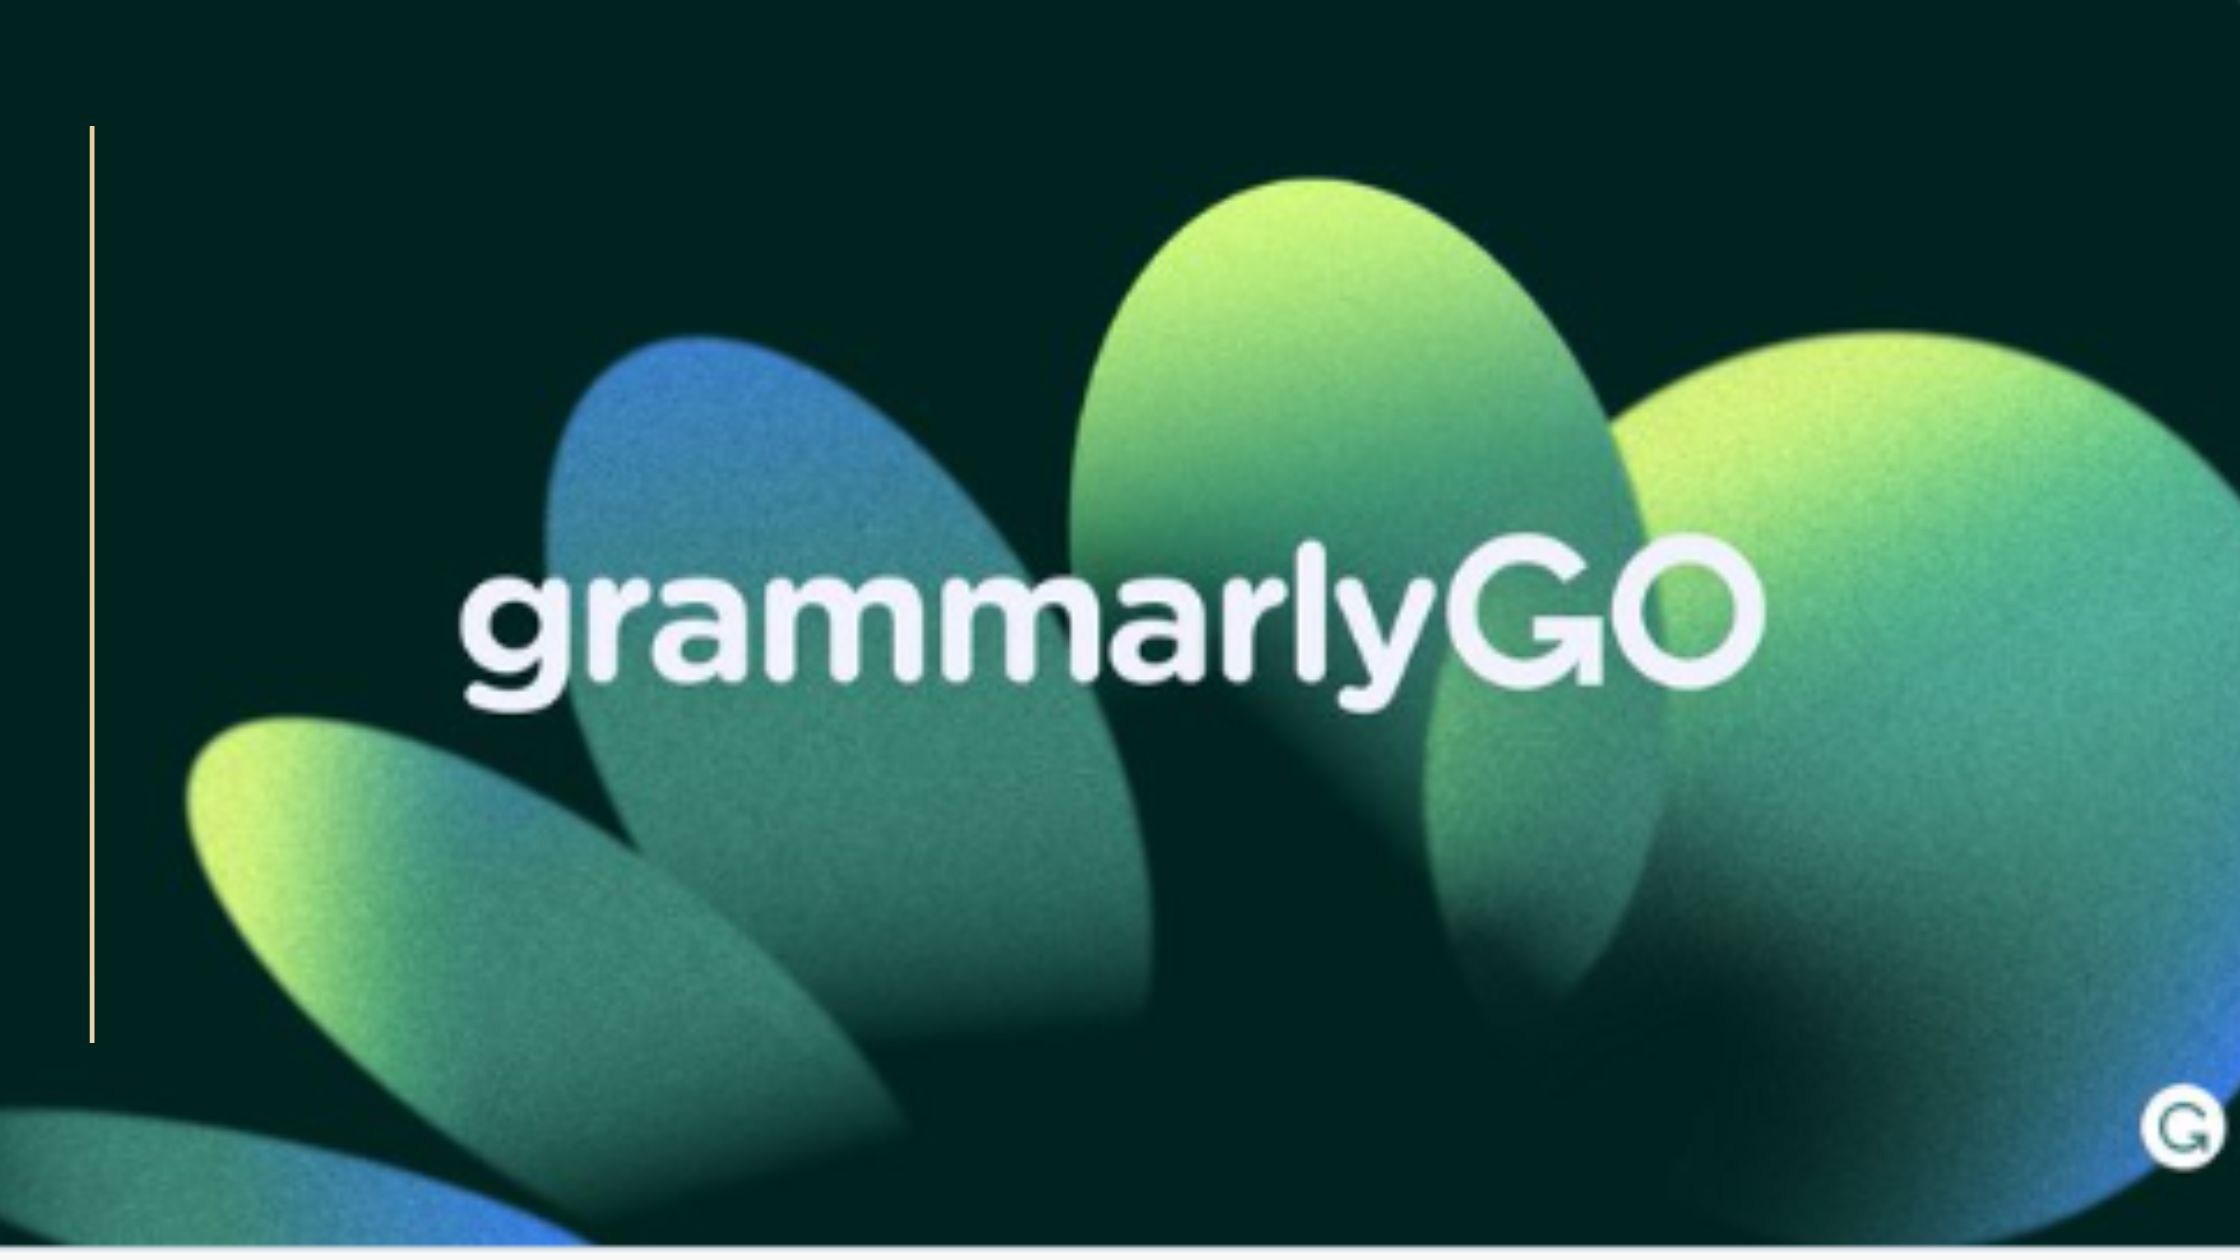 Grammarly is launching GrammarlyGo, a new AI tool in April